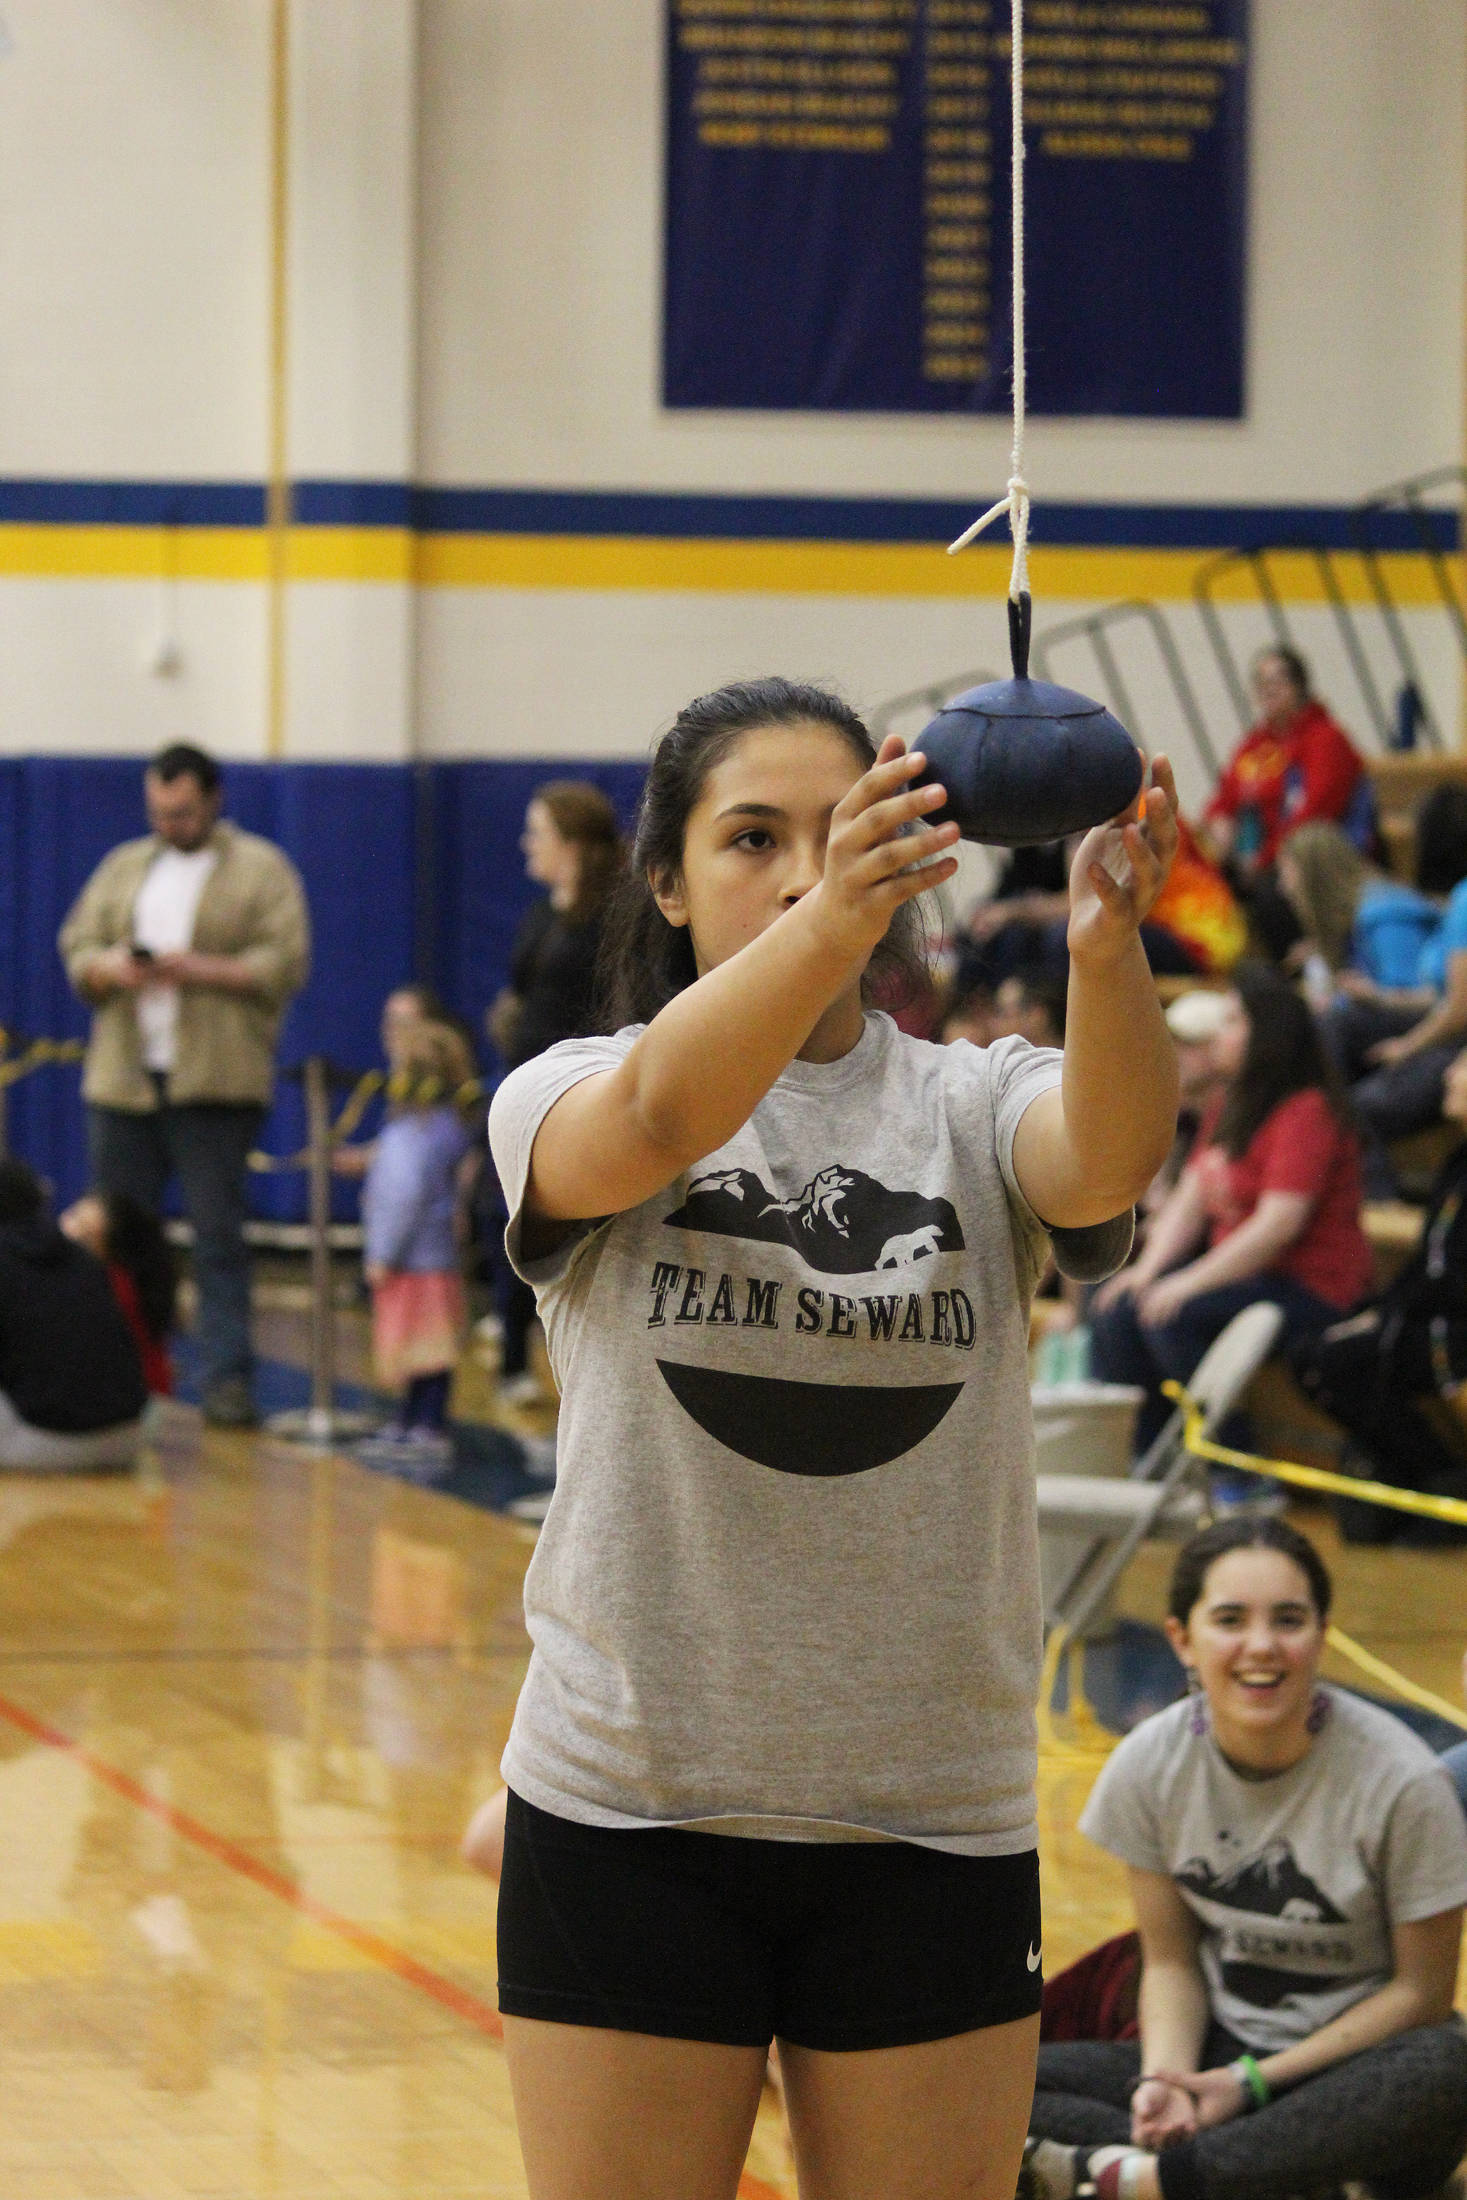 Chloe Lastimosa, 13, steadies her target before participating in the one-foot high kick Saturday, March 30, 2019 at the Kachemak Bay Traditional Games at Homer High School in Homer, Alaska. (Photo by Megan Pacer/Homer News)